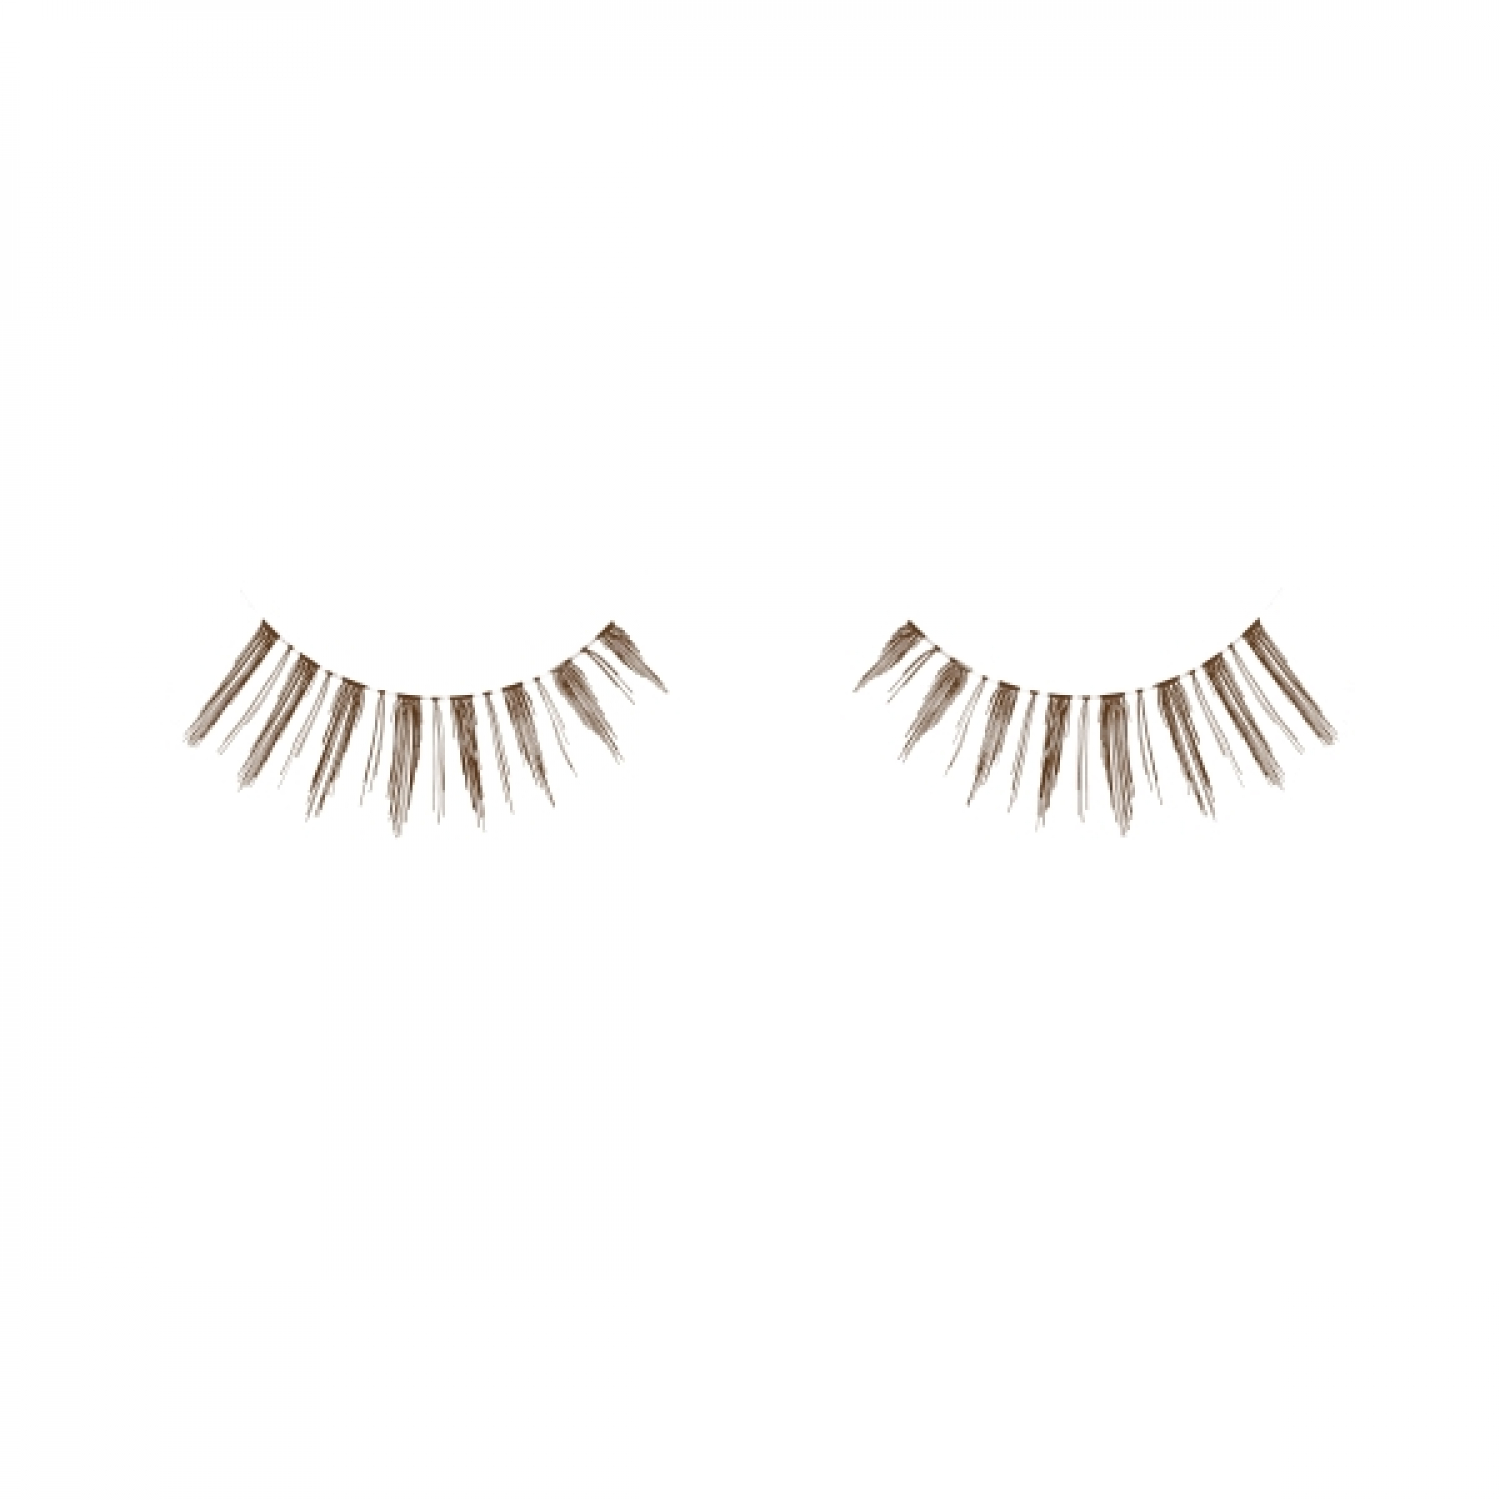 Ardell Lashes demi pixies brown